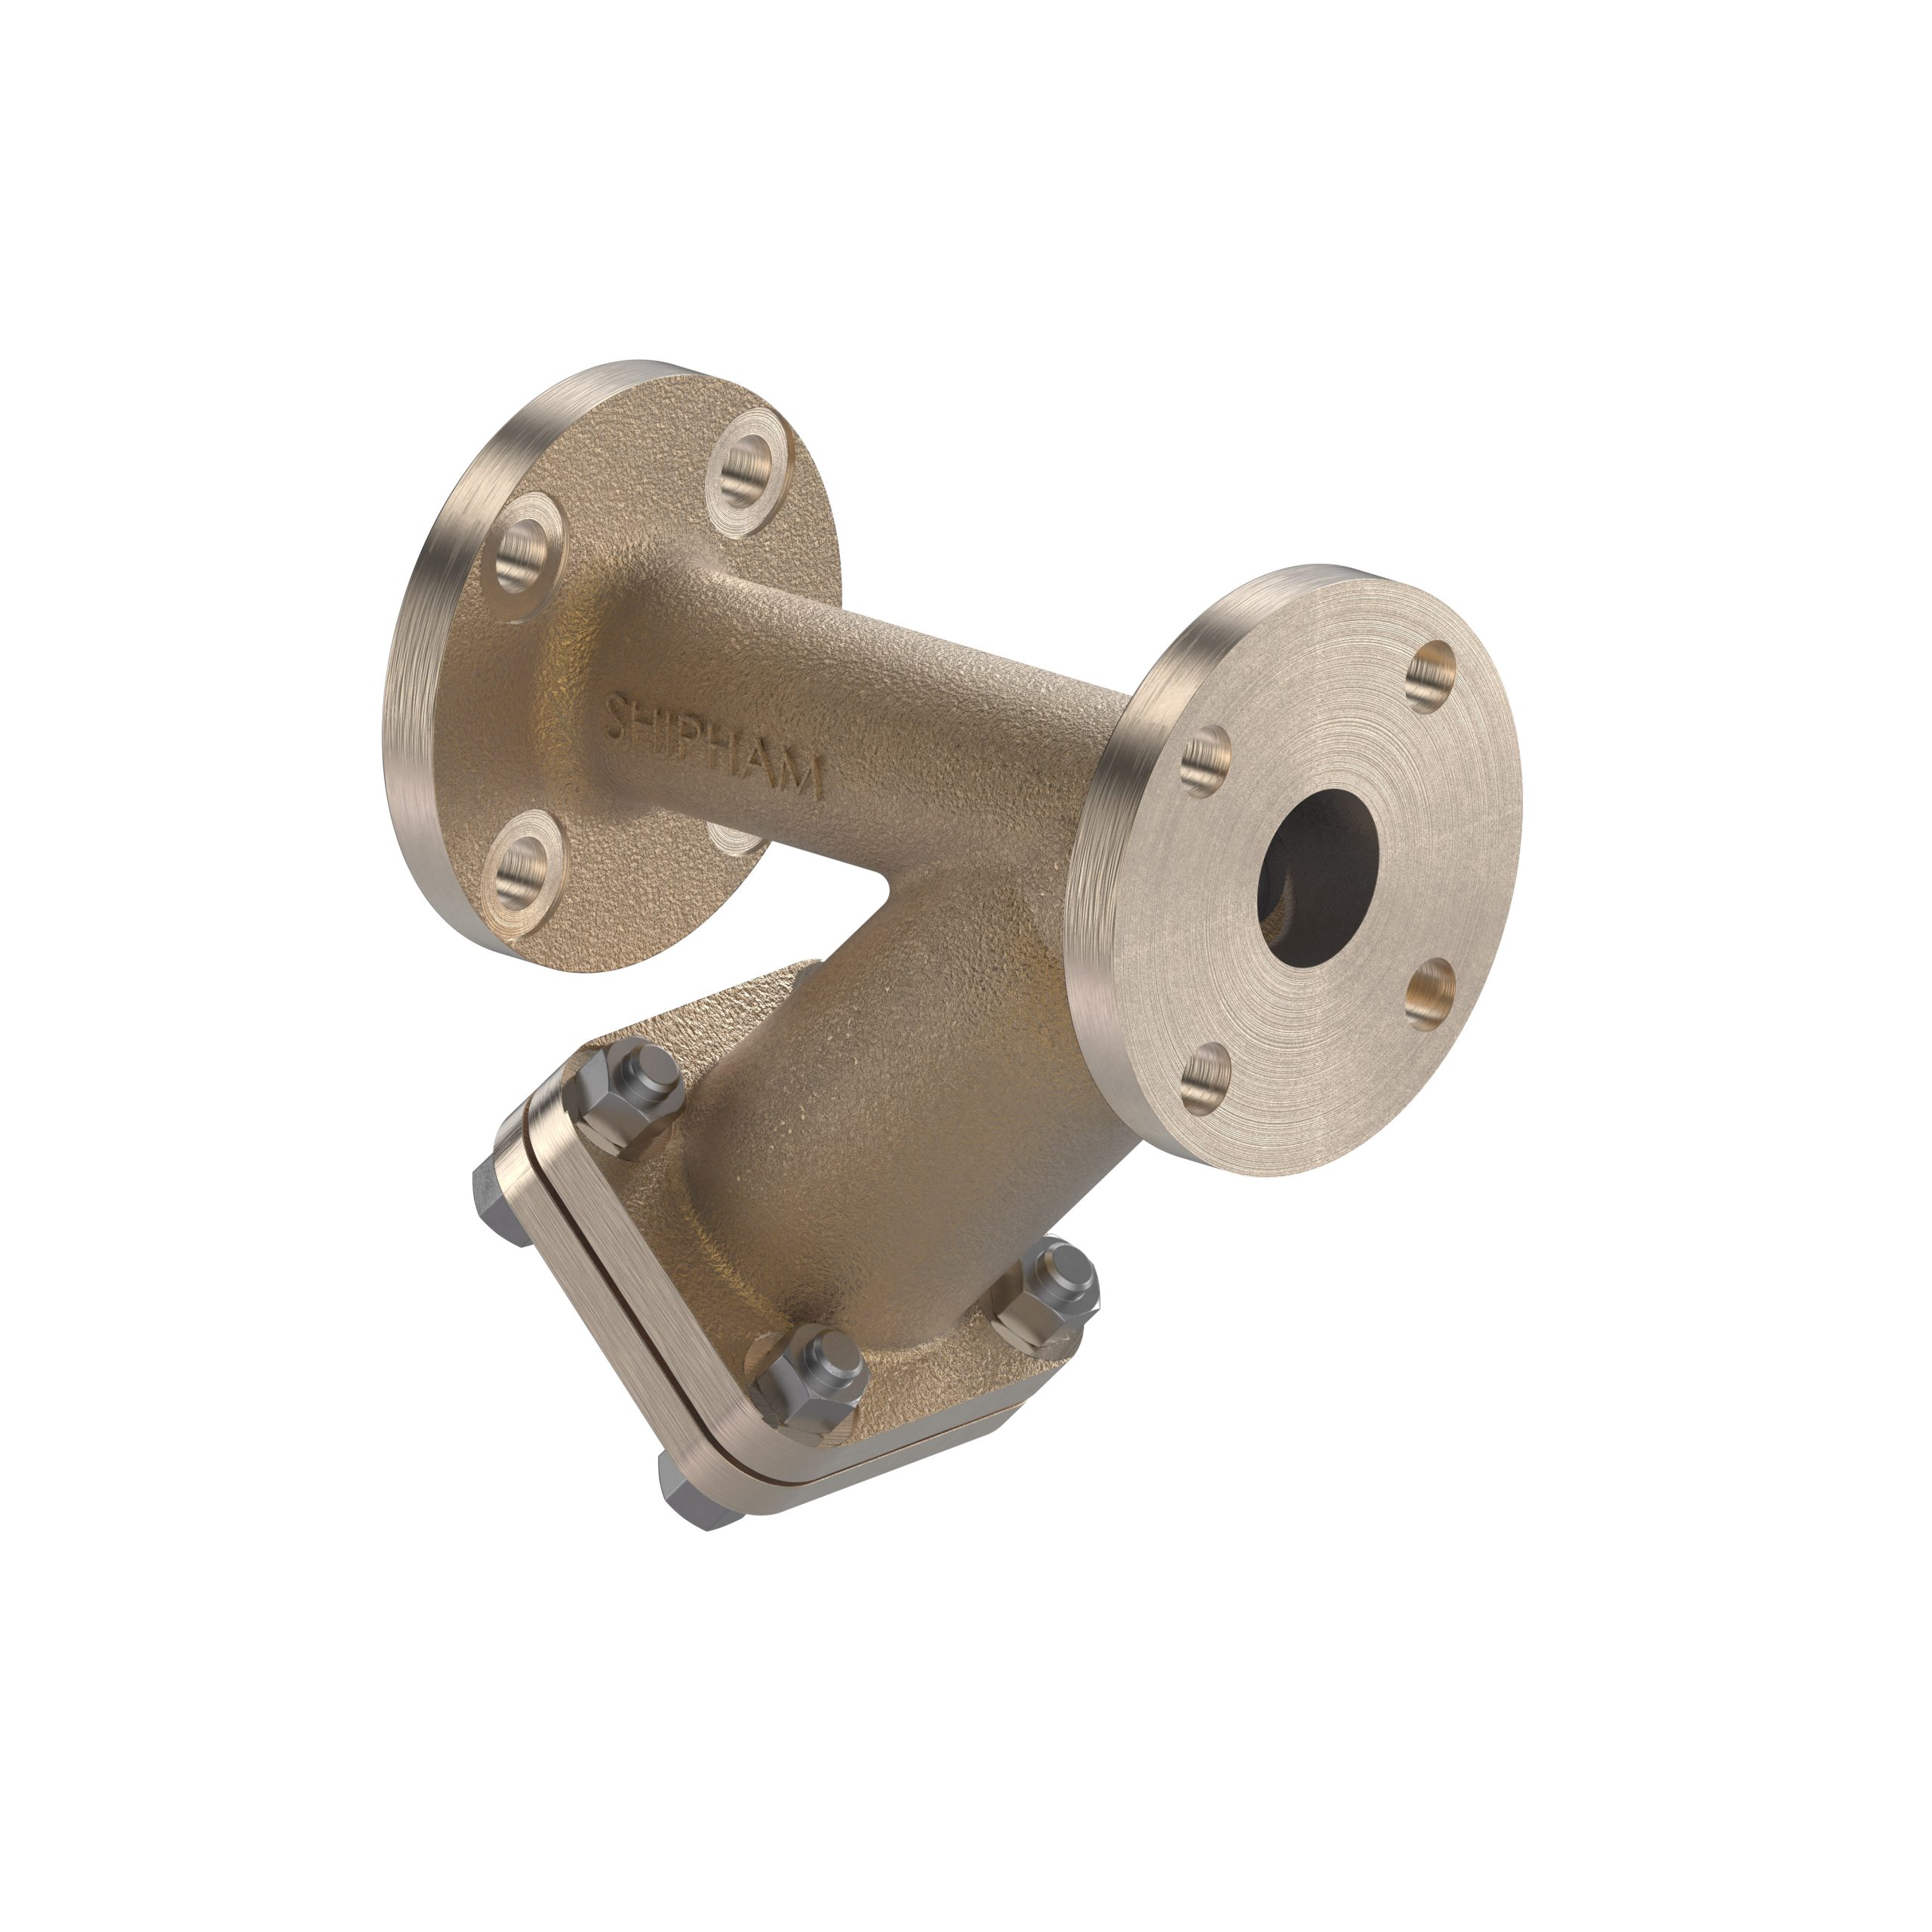 Shipham Valves Y-Type Strainer with Bolted Bonnet